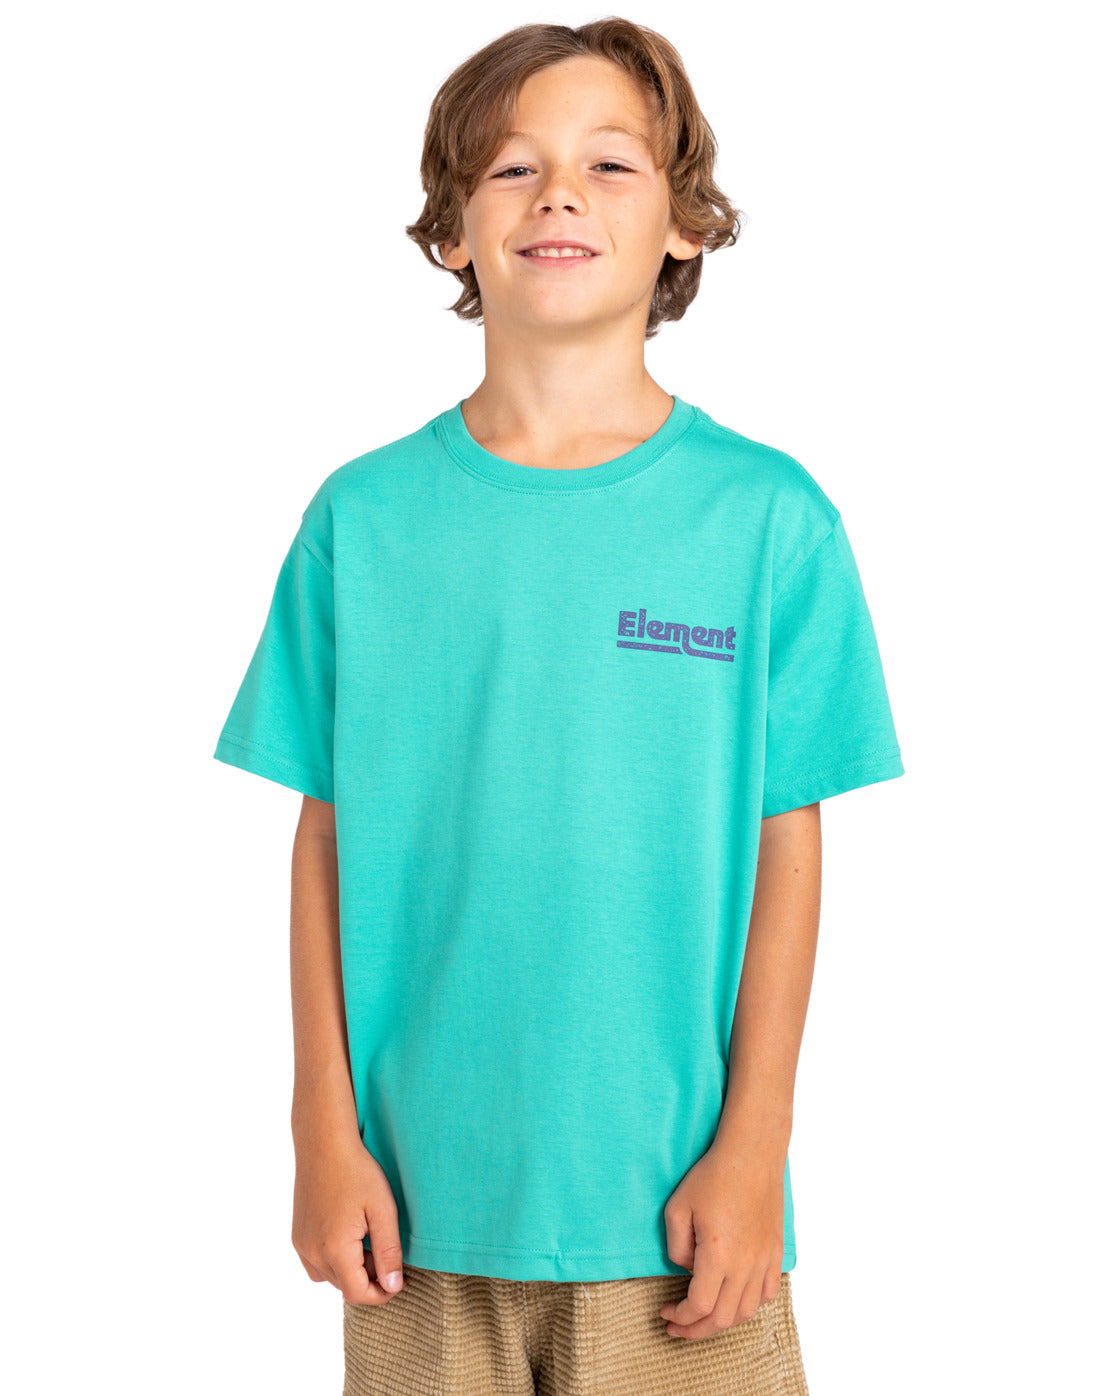 ELEMENT - SUNUP SS YOUTH TEE - LAGOON